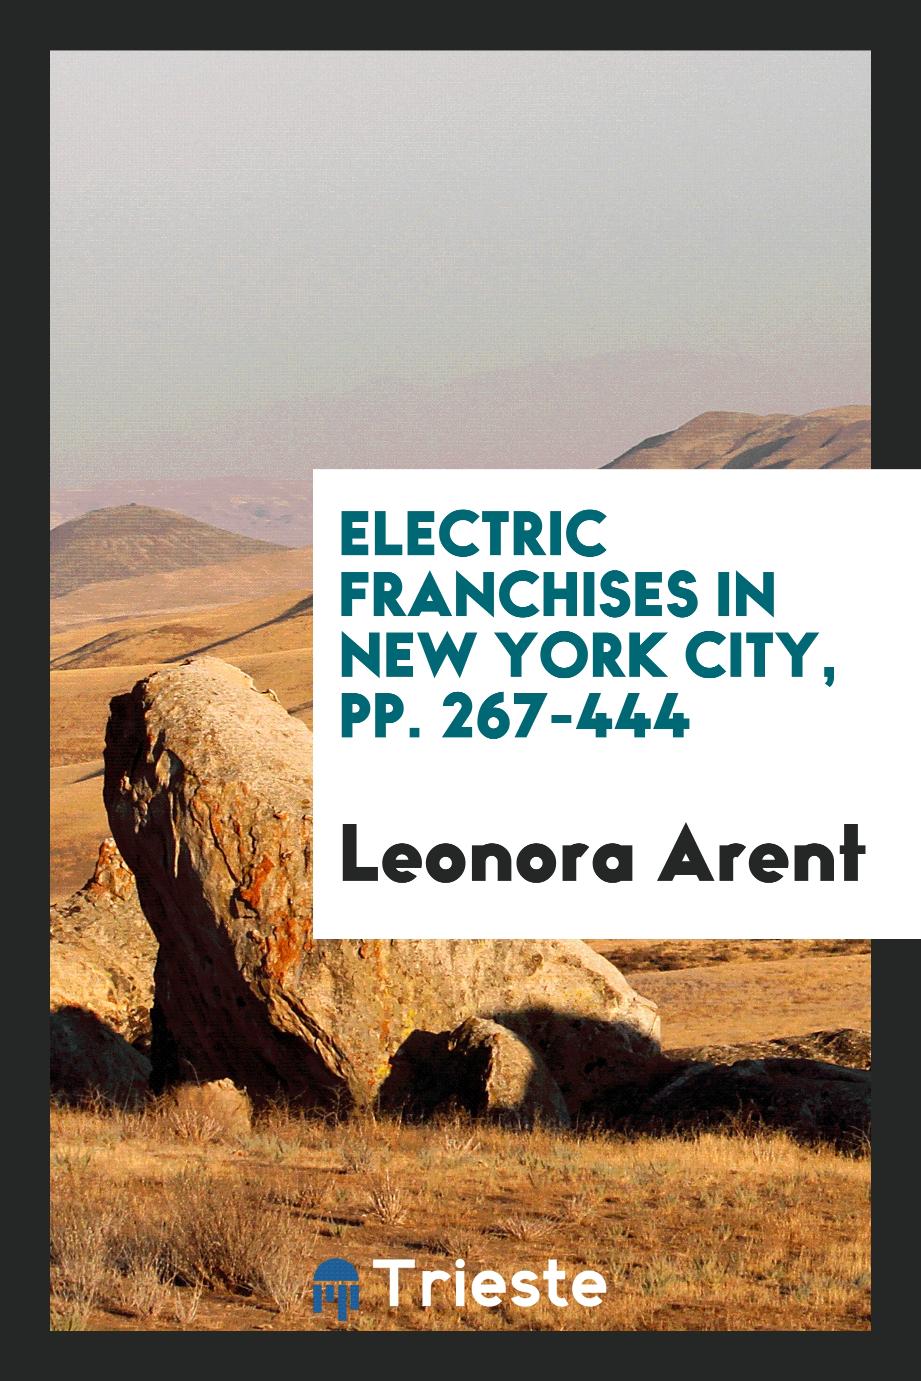 Leonora Arent - Electric Franchises in New York City, pp. 267-444